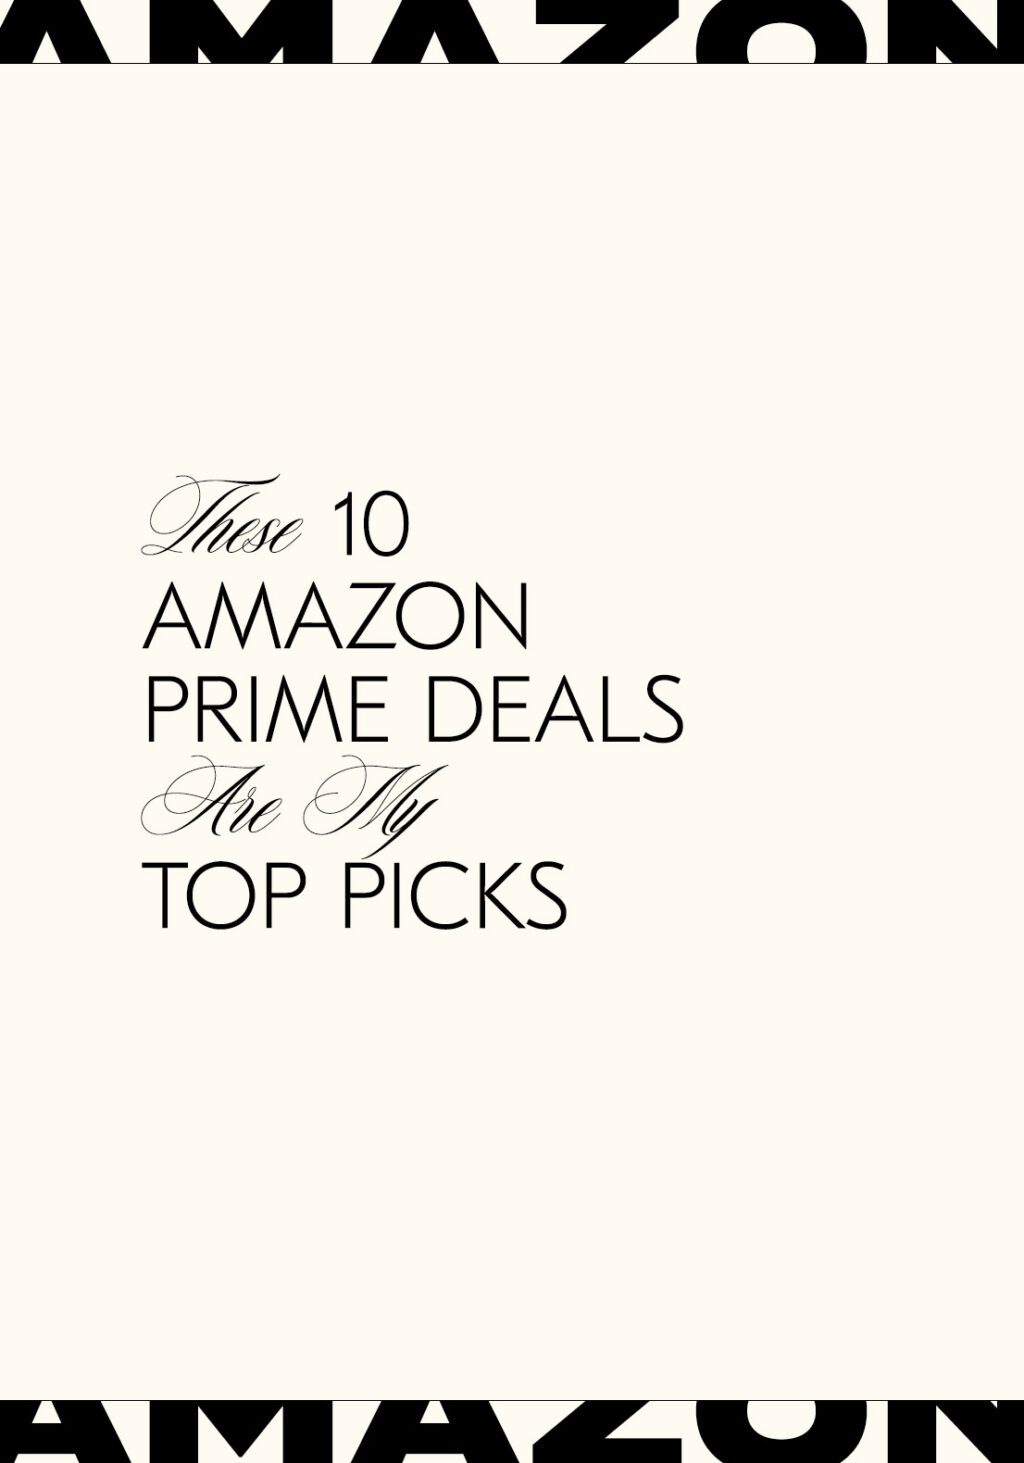 Shopping Amazon Prime Day? Here’s my Top 10.